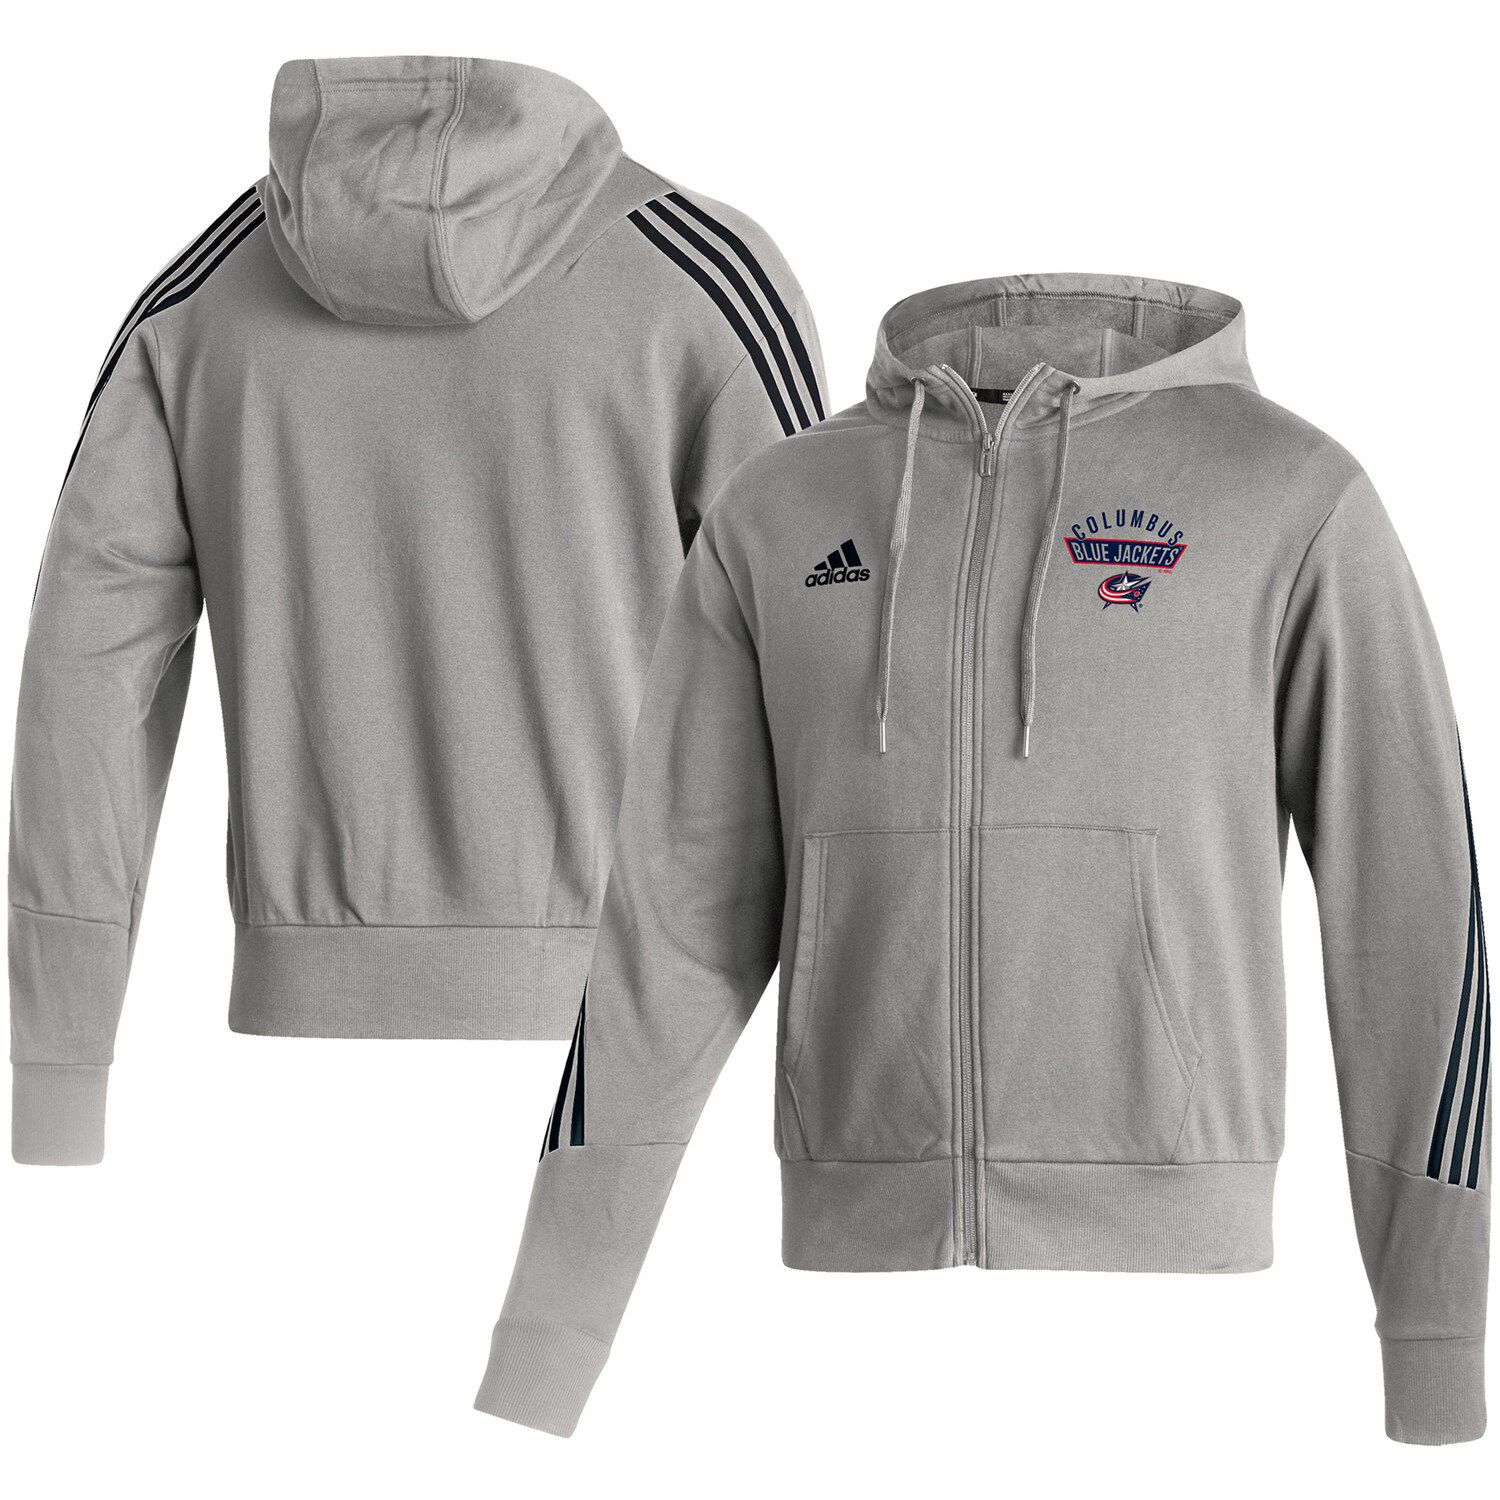 adidas Performance REAL MADRID DESIGNED FOR GAMEDAY FULL ZIP